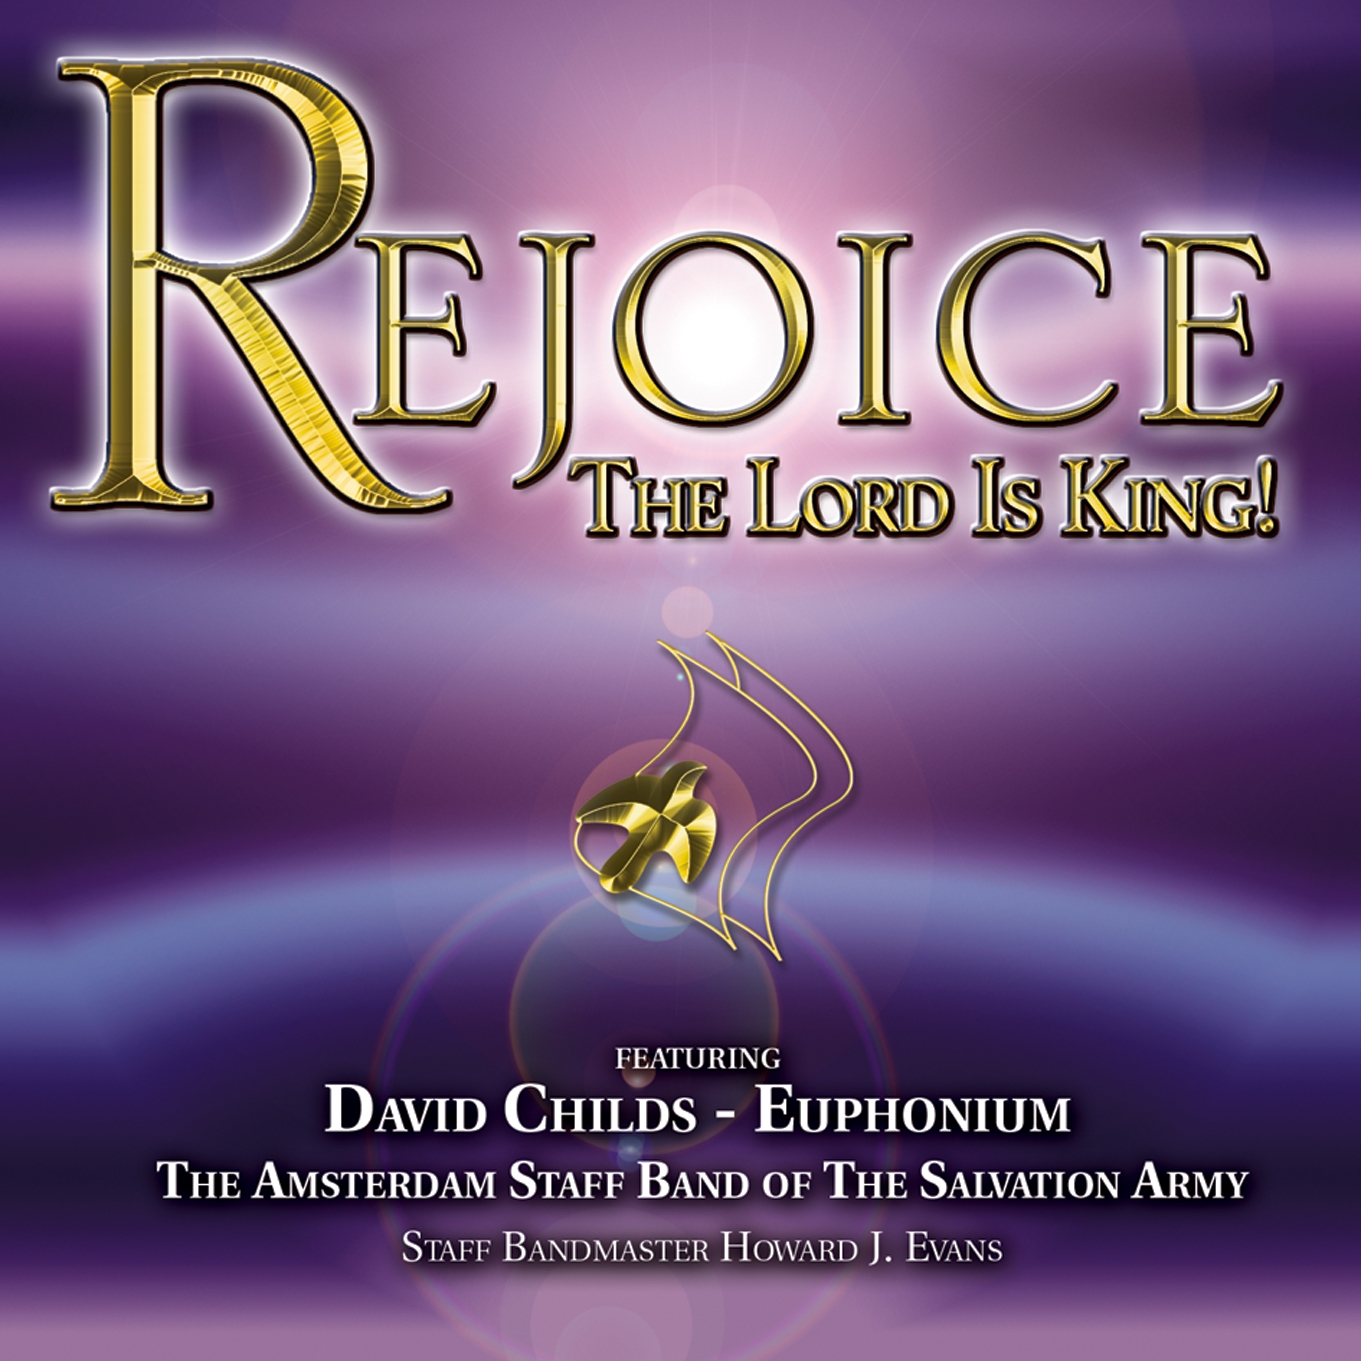 Rejoice the Lord is King - featuring David Childs